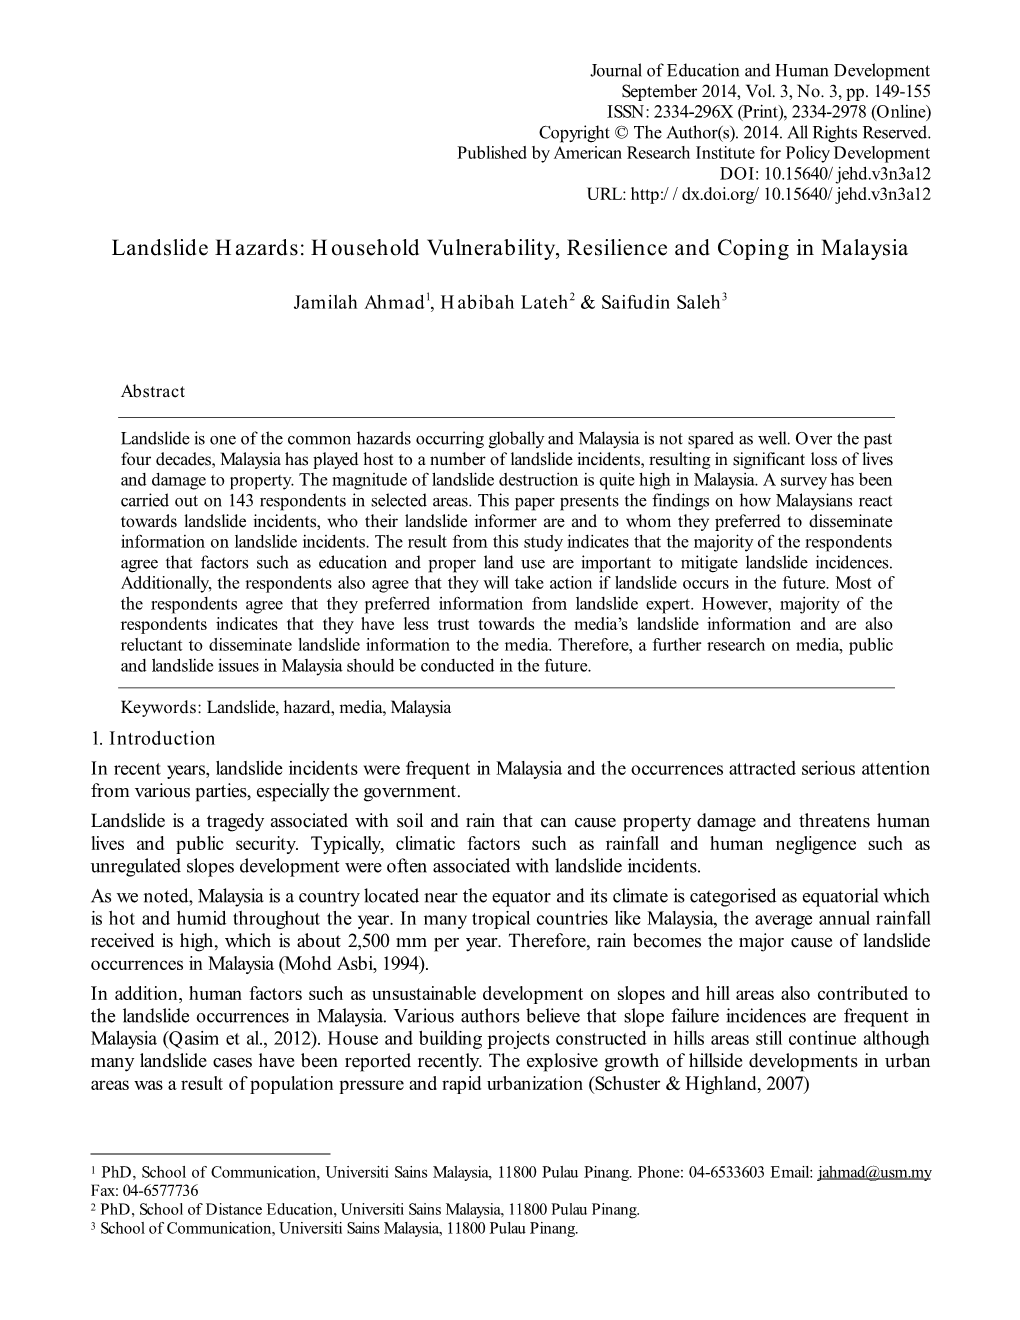 Landslide Hazards: Household Vulnerability, Resilience and Coping in Malaysia